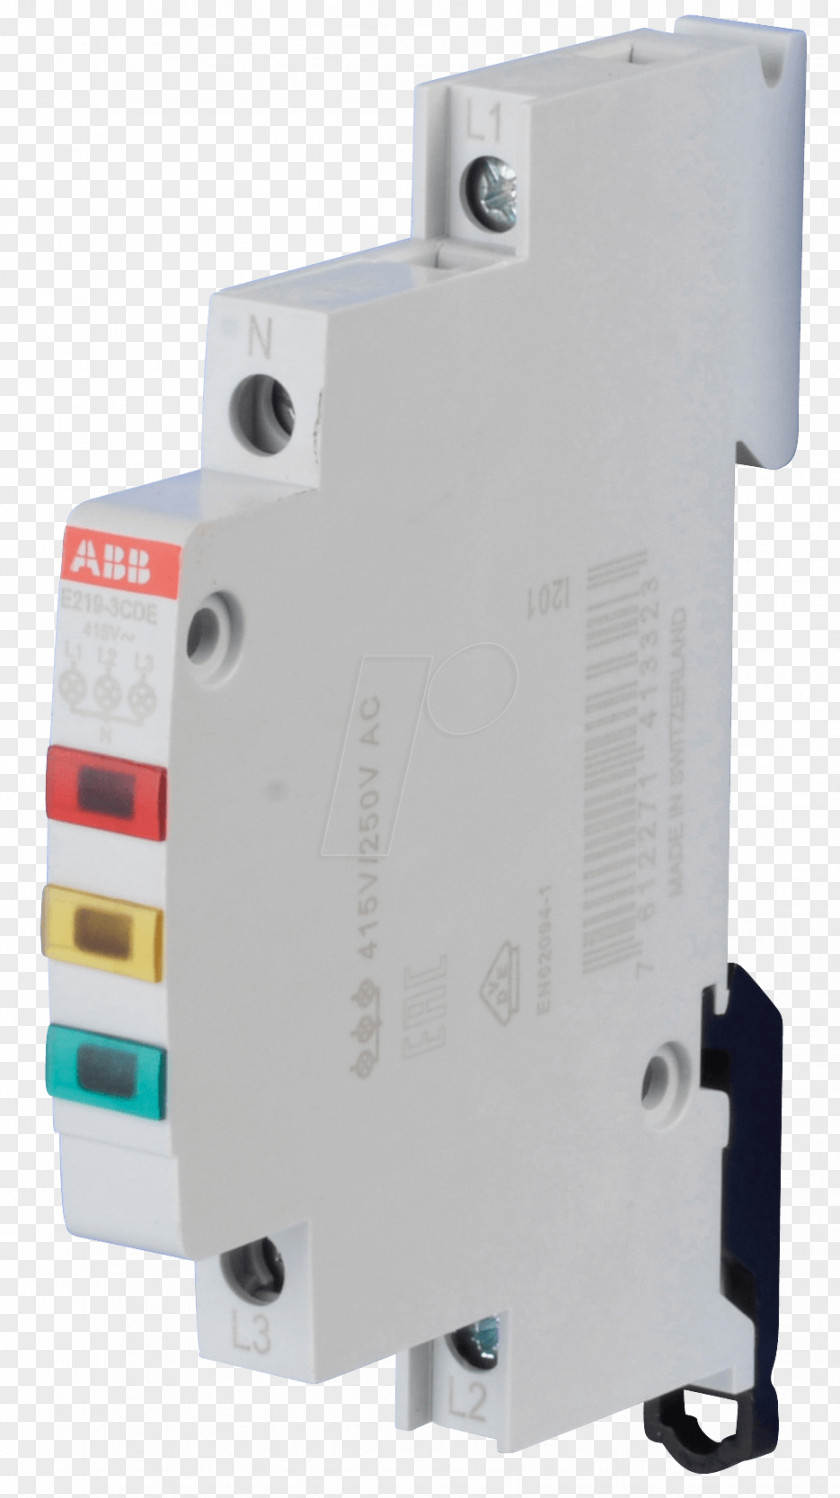 ABB Indicator Light For Distribution Board E219-3 Group Electrical Switches DIN Rail PNG